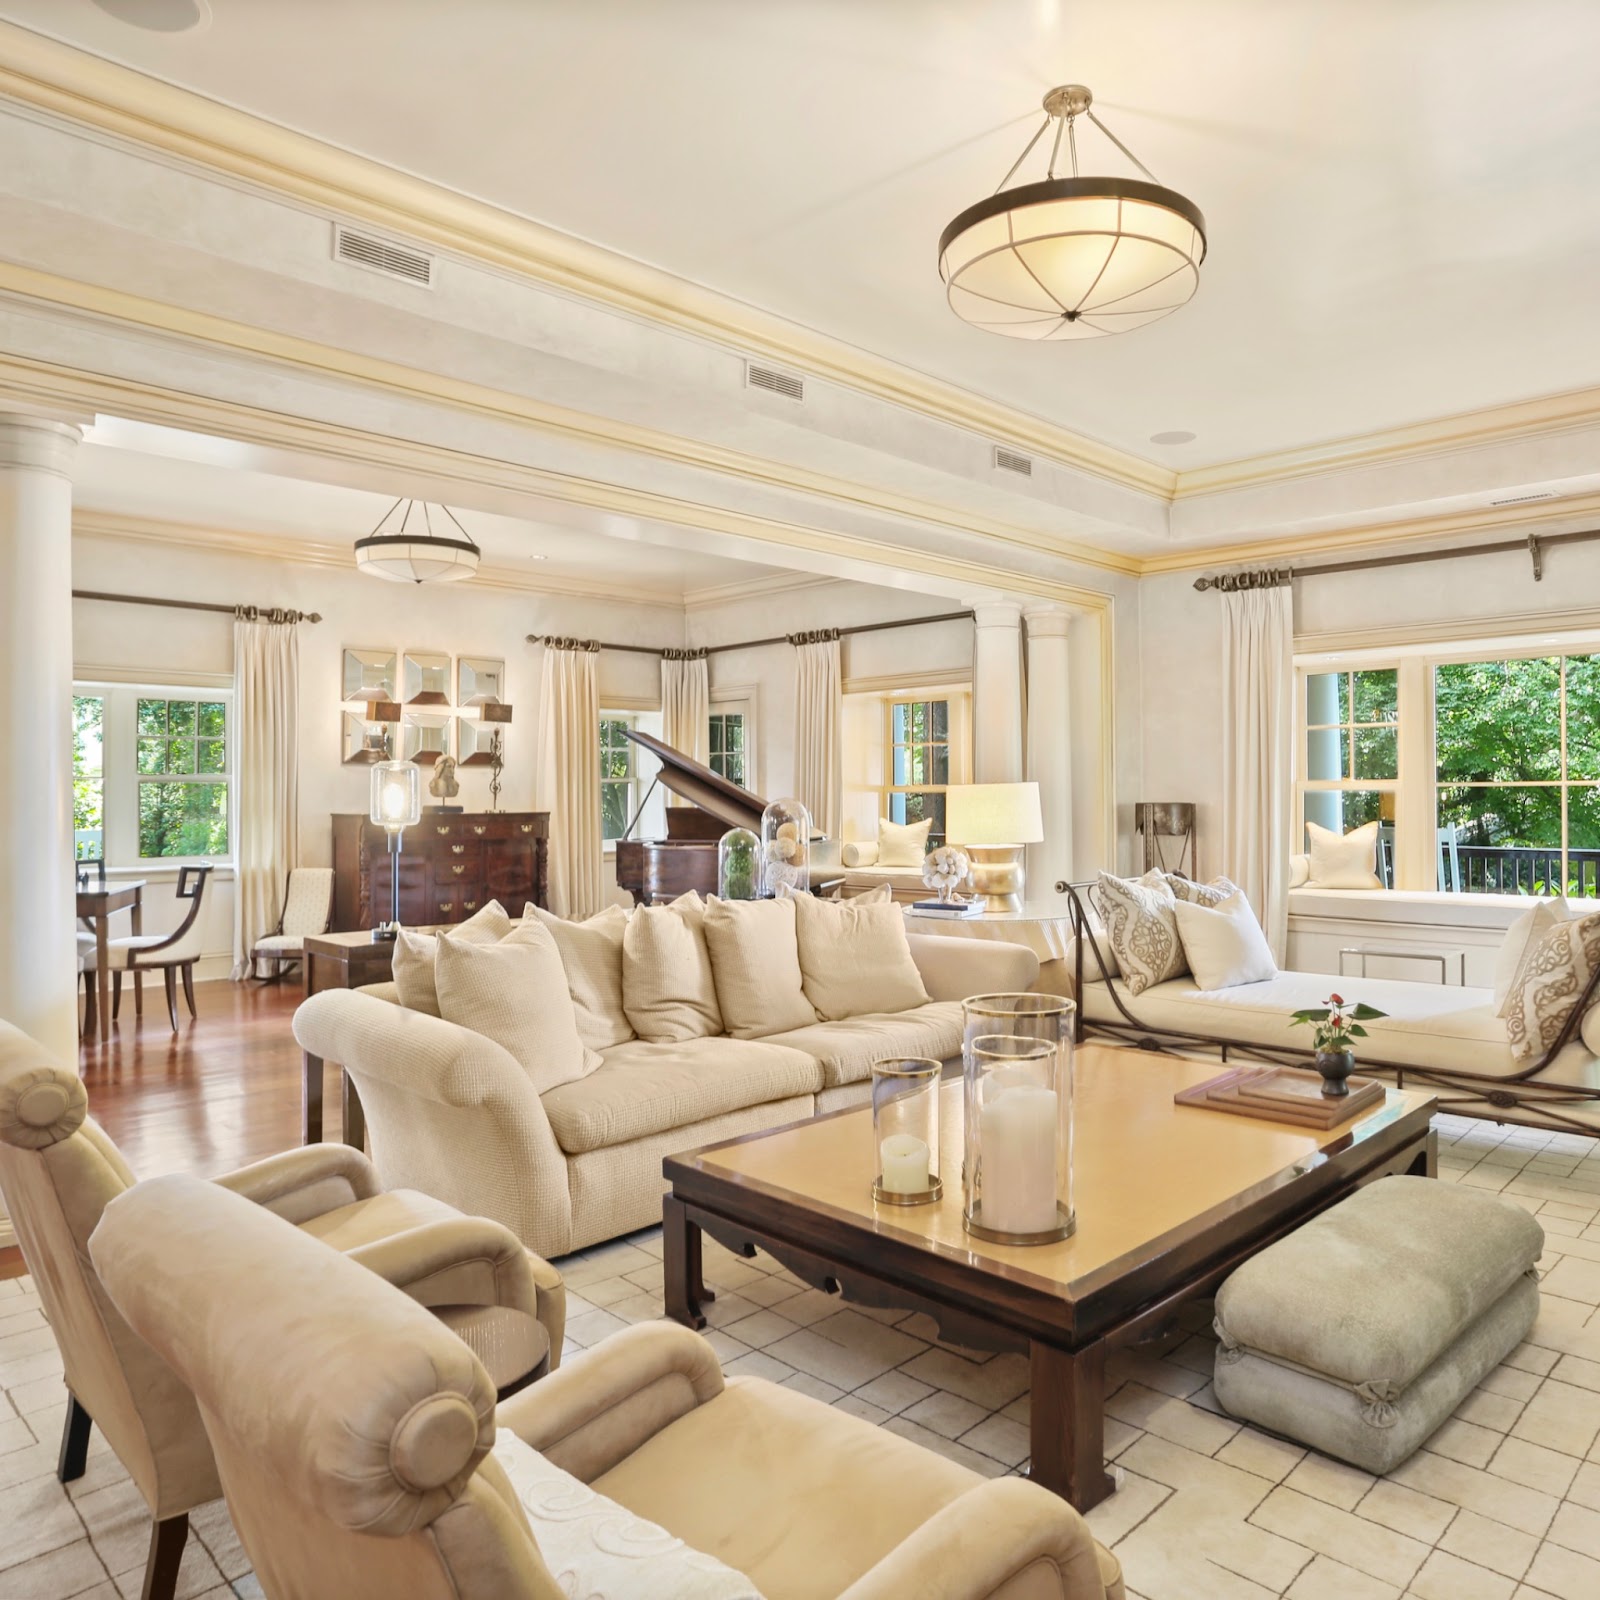 A warm creamy white living room features large picture windows with a lot of natural light.